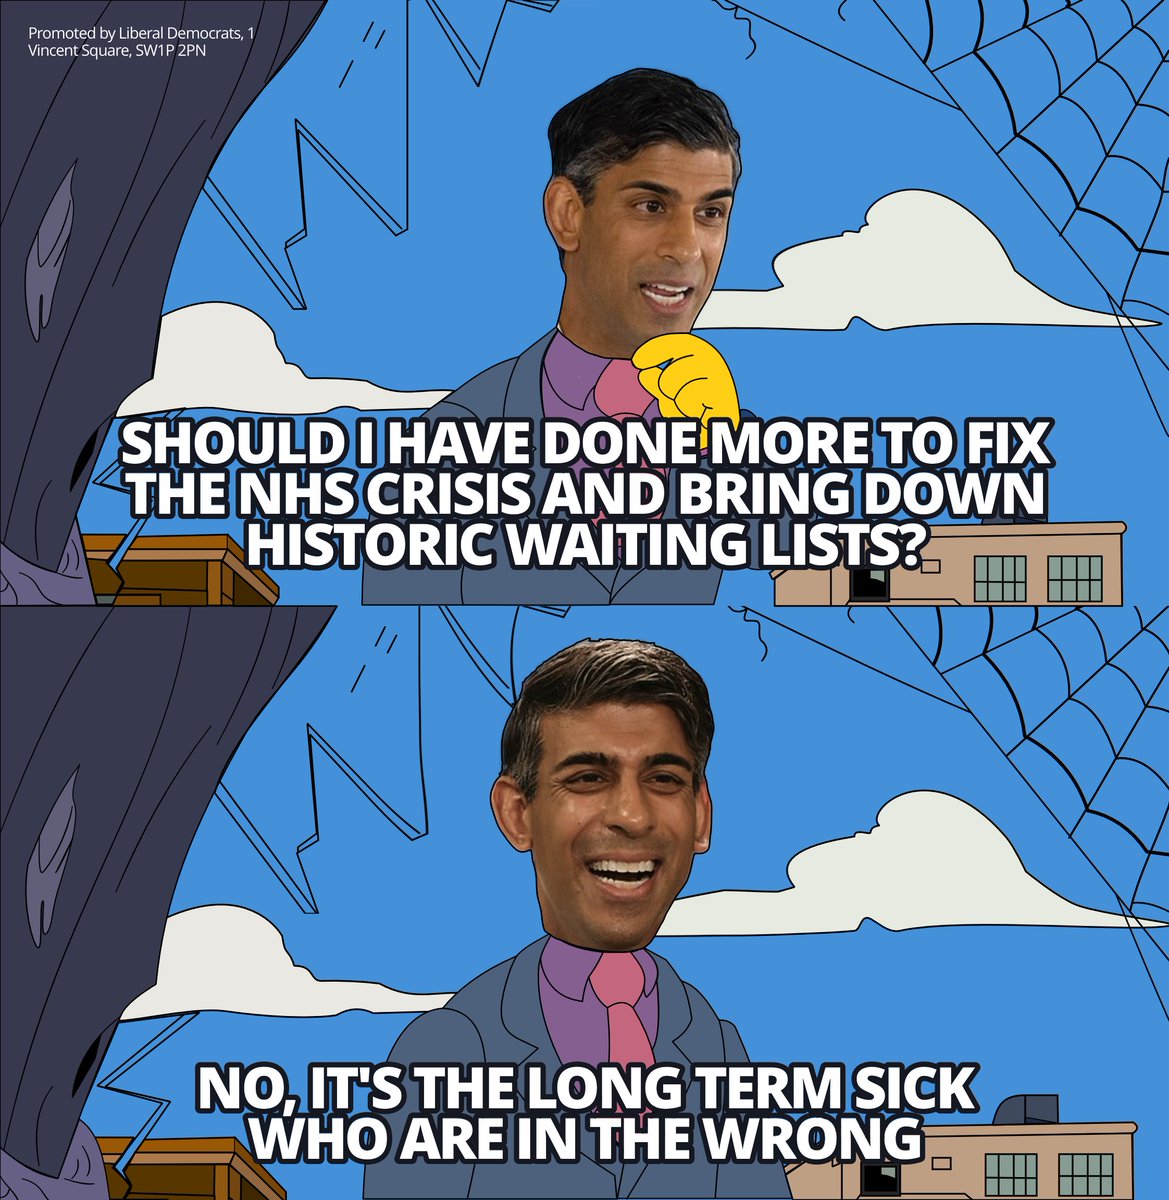 Rishi Sunak is attempting to blame the British people for his own government’s failures on the economy and the NHS and it simply won’t wash.